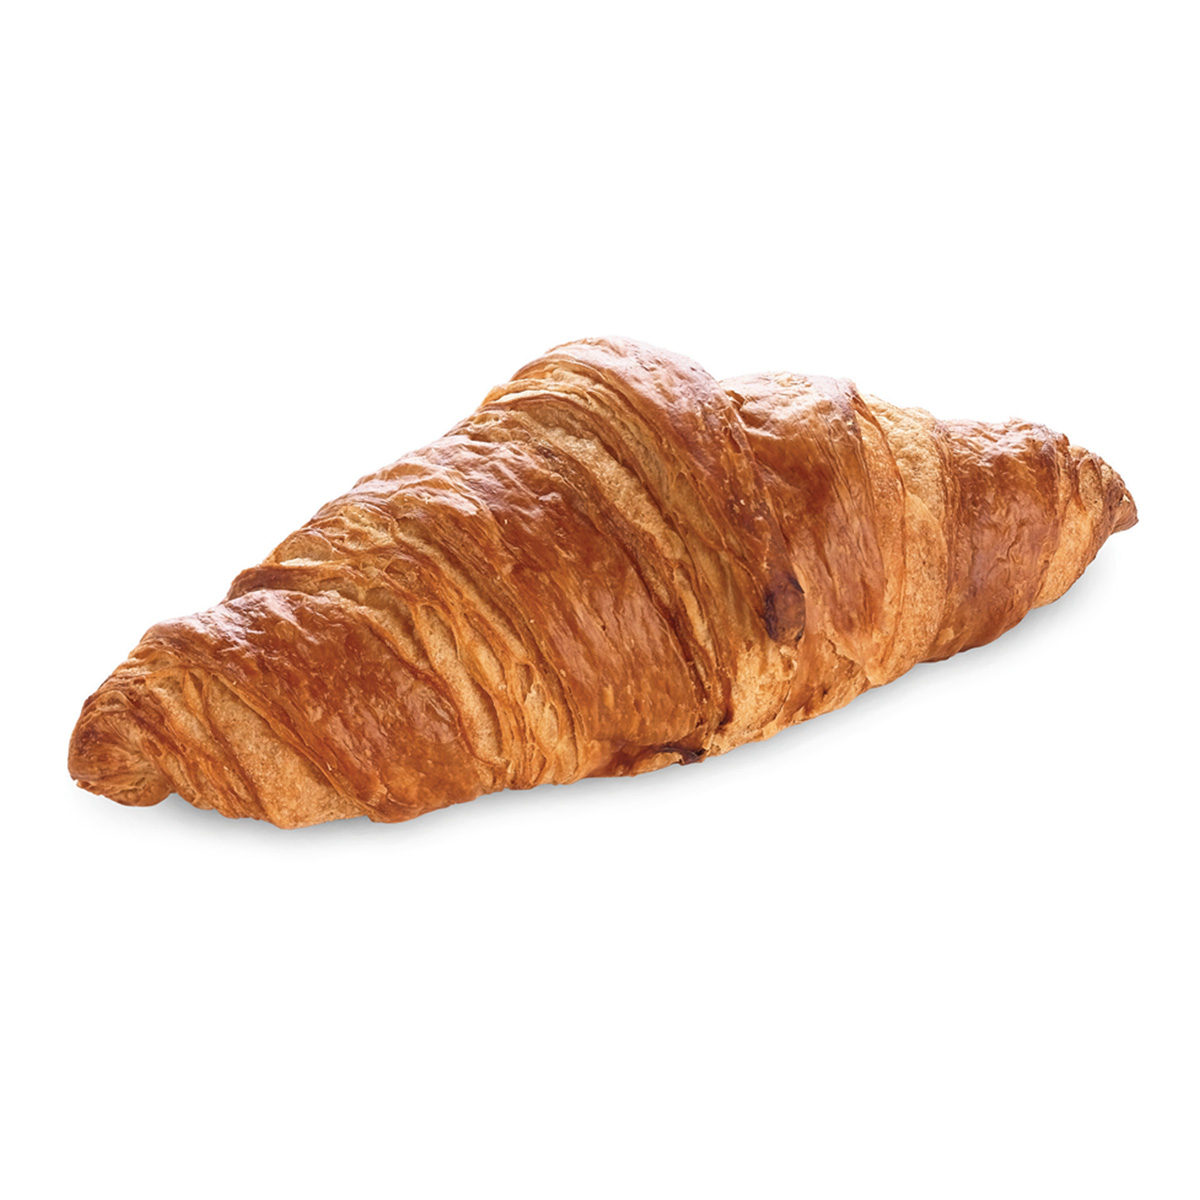 Molco Croissant recht, roomboter